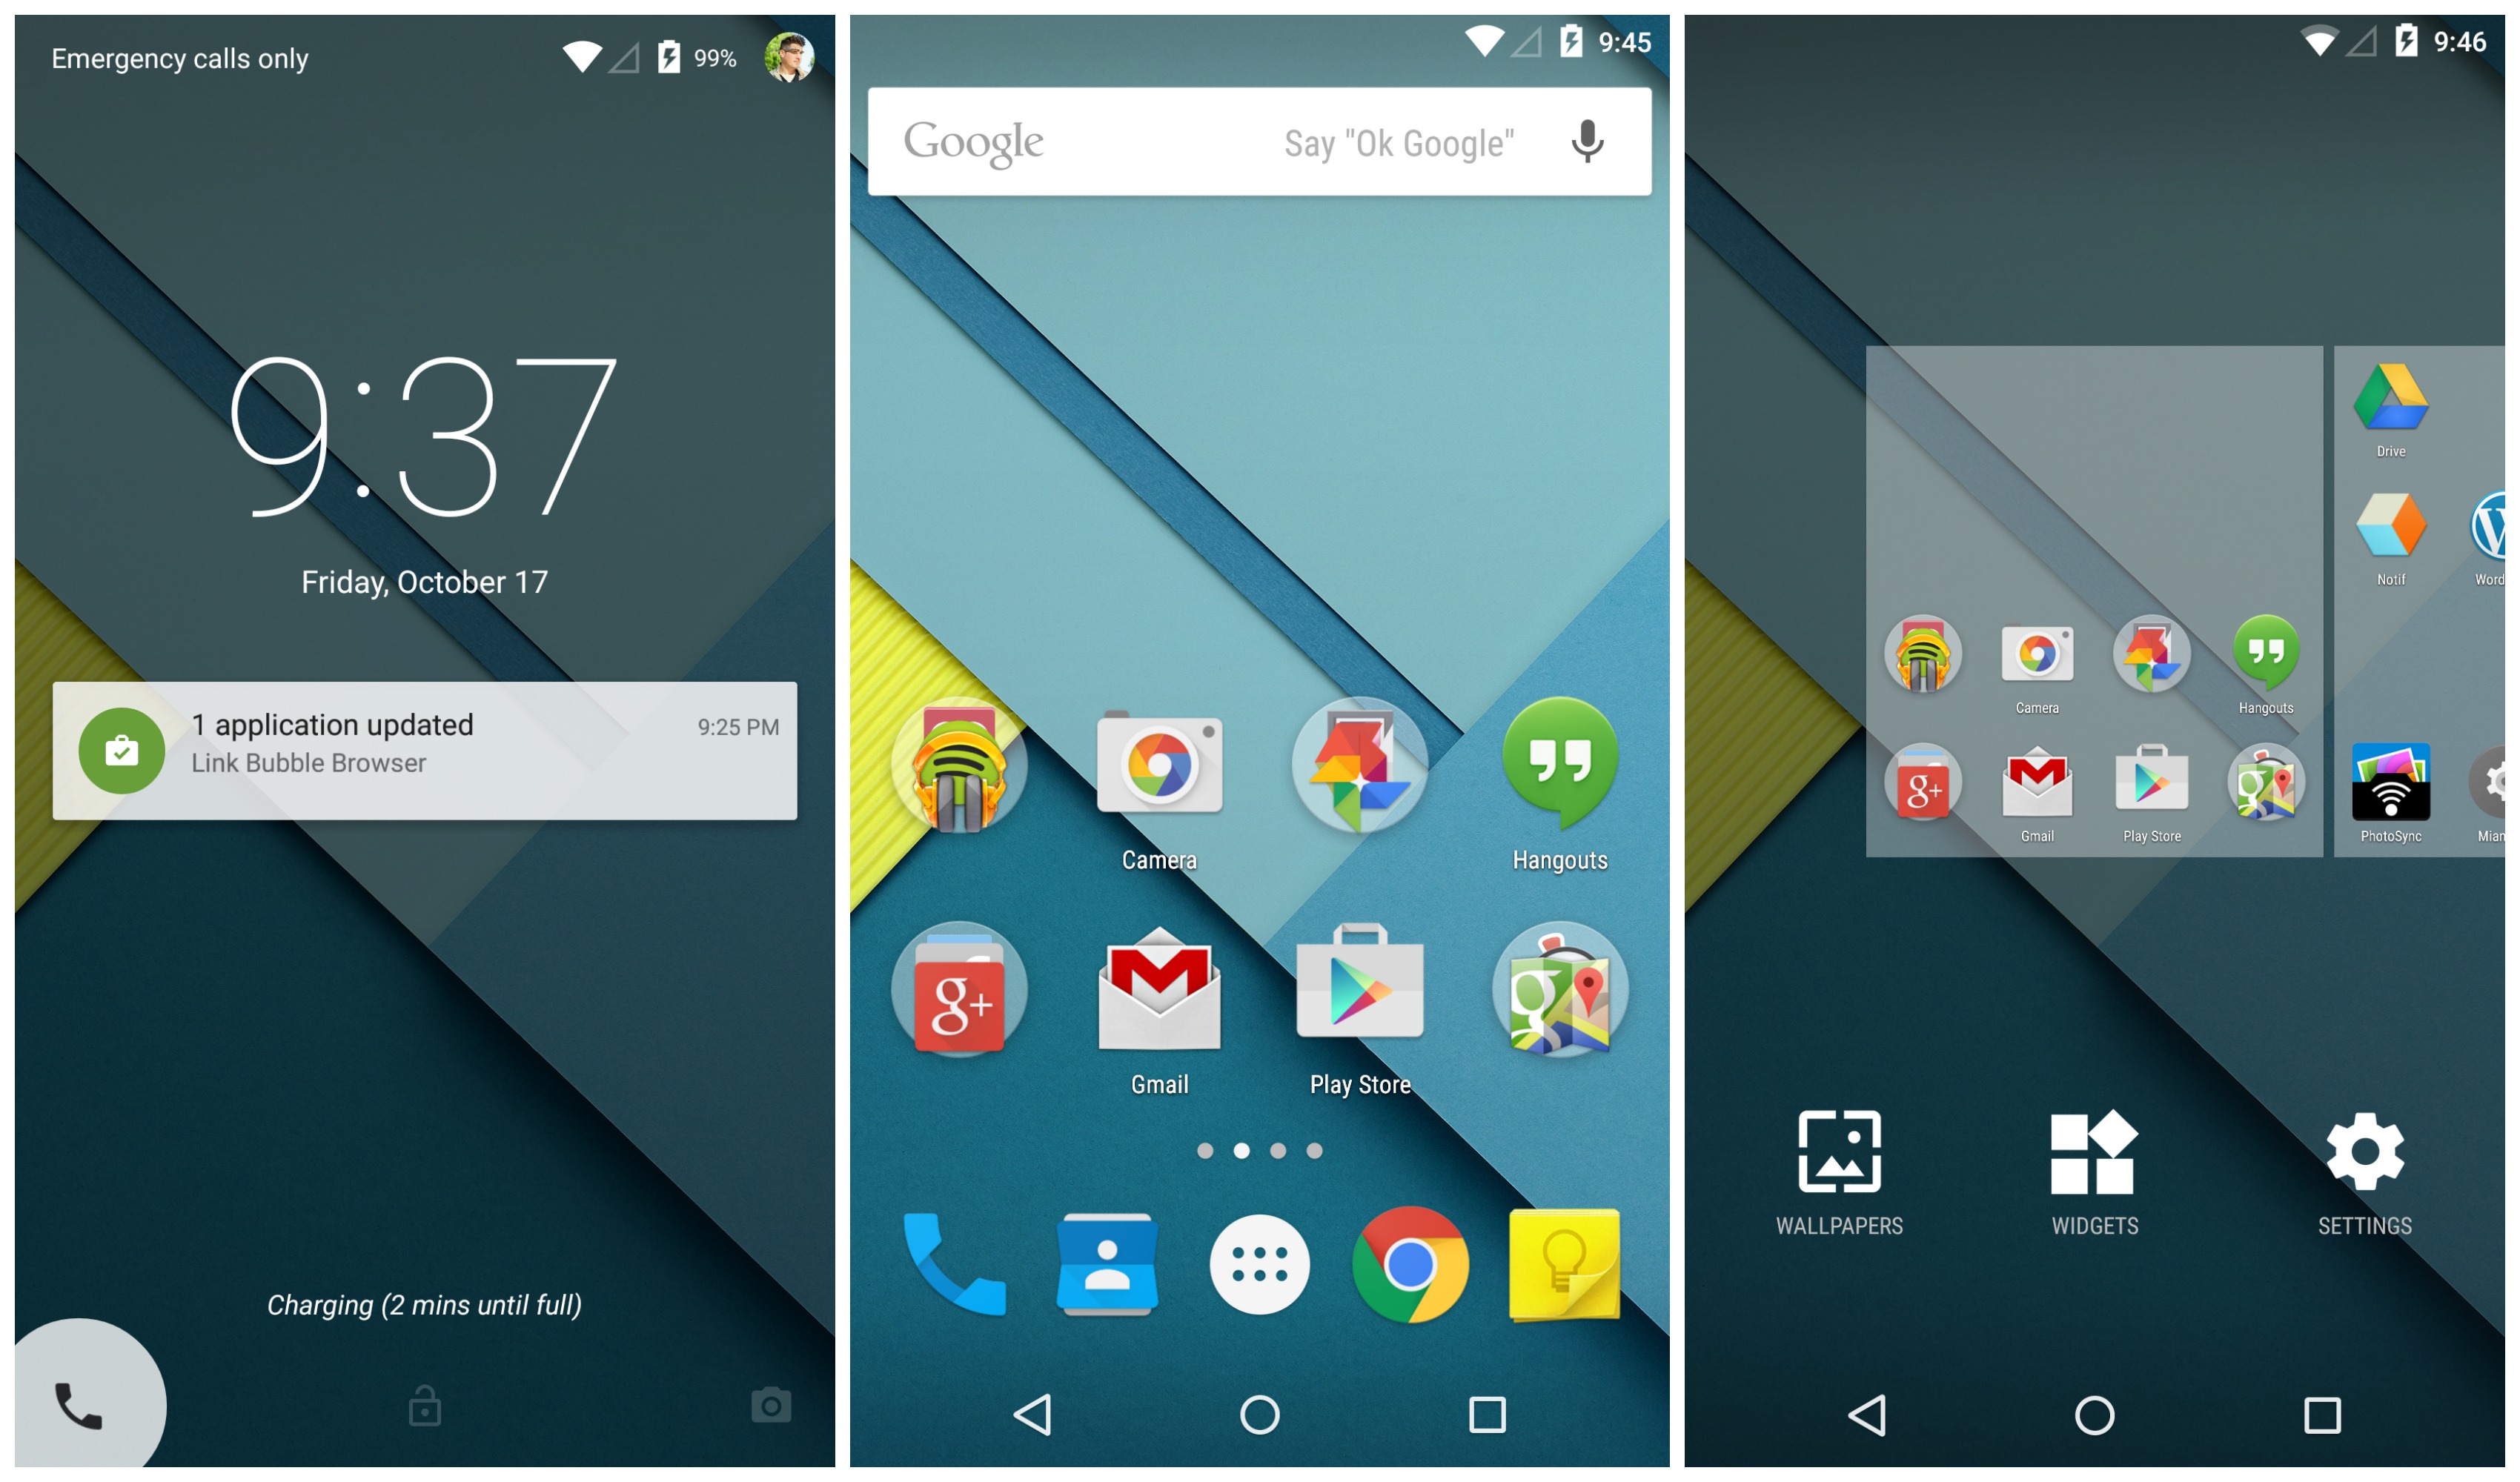 Версия 5.5 1. Android 5.1 Lollipop. Android 5.0 / 5.1 Lollipop. Версия андроид 5.1. Android 5.0 Lollipop 2014.